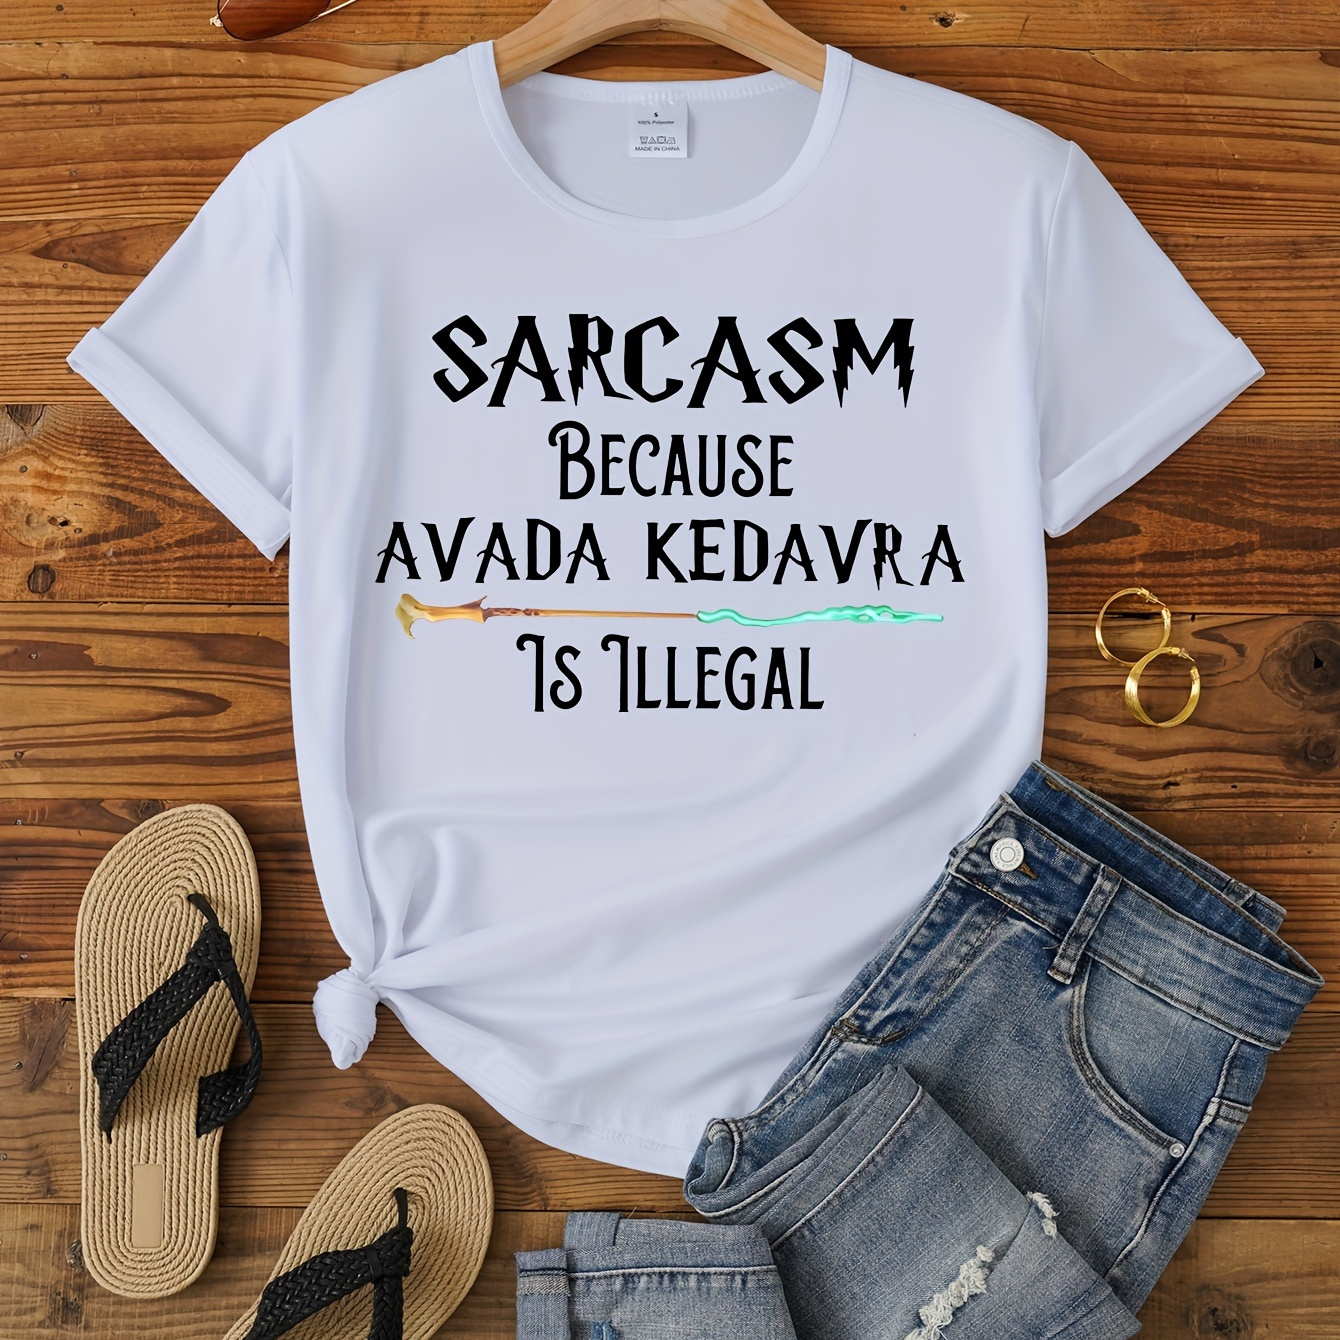 

Sarcasm Print Crew Neck T-shirt, Short Sleeve Casual Top For Summer & Spring, Women's Clothing